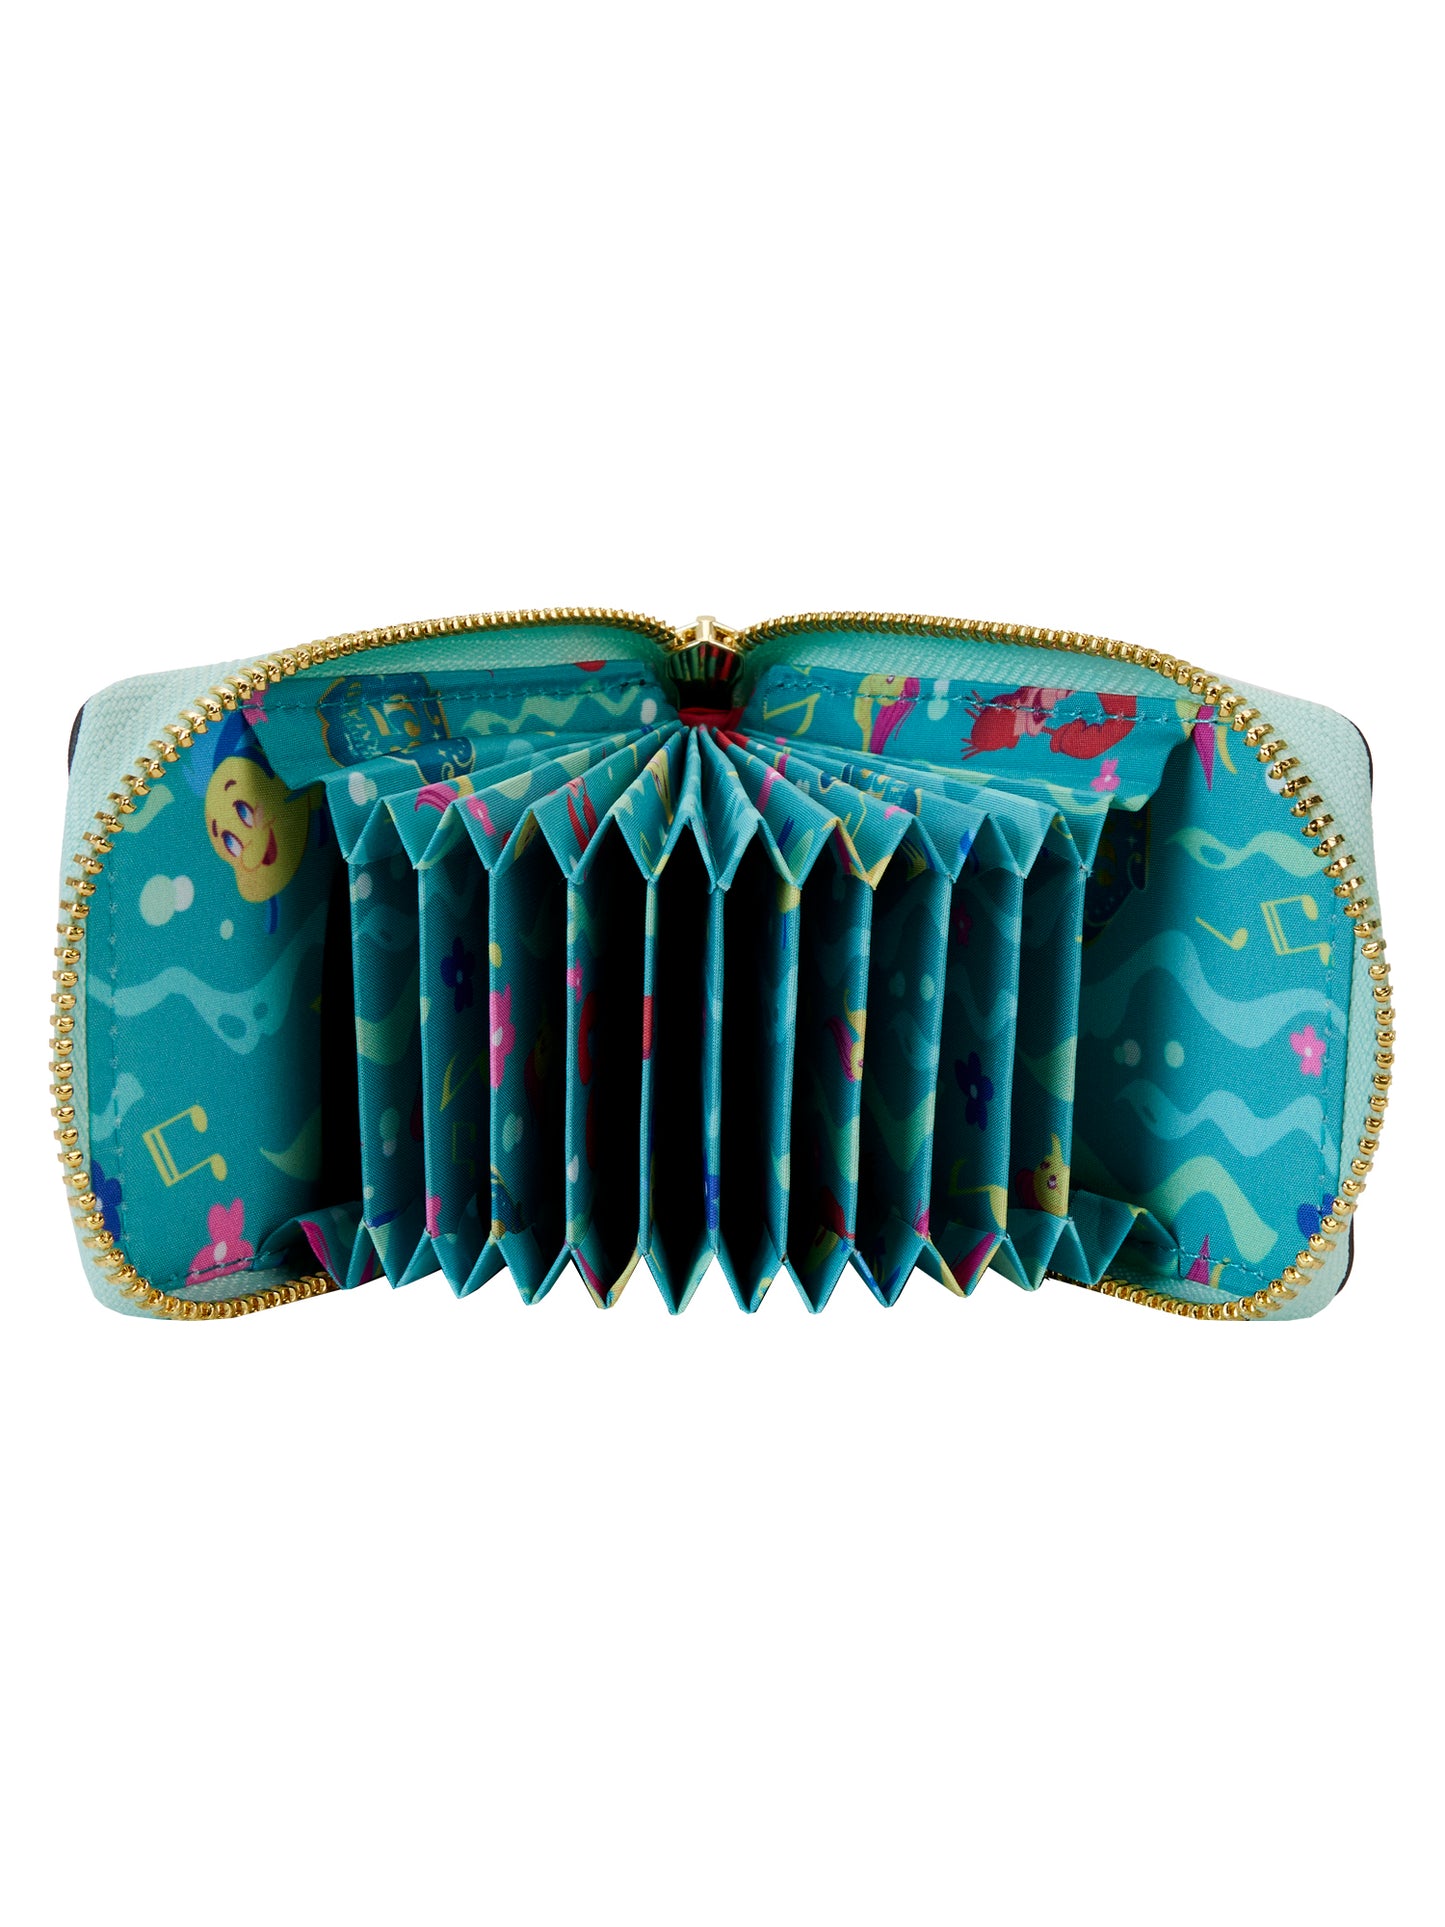 Loungefly x Disney The Little Mermaid Accordion Wallet